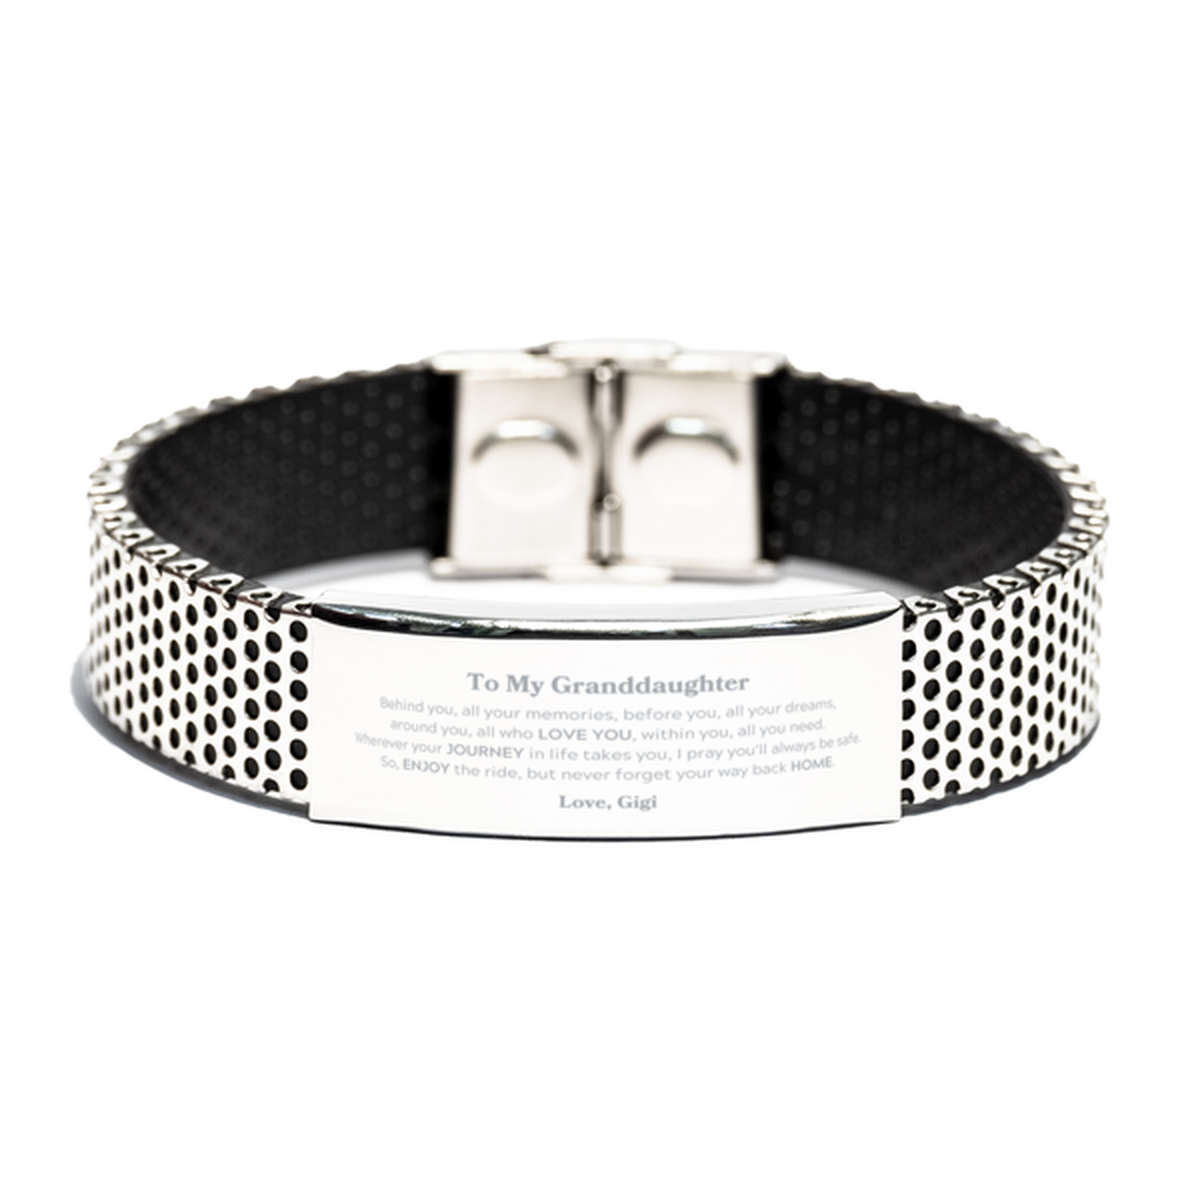 To My Granddaughter Graduation Gifts from Gigi, Granddaughter Stainless Steel Bracelet Christmas Birthday Gifts for Granddaughter Behind you, all your memories, before you, all your dreams. Love, Gigi